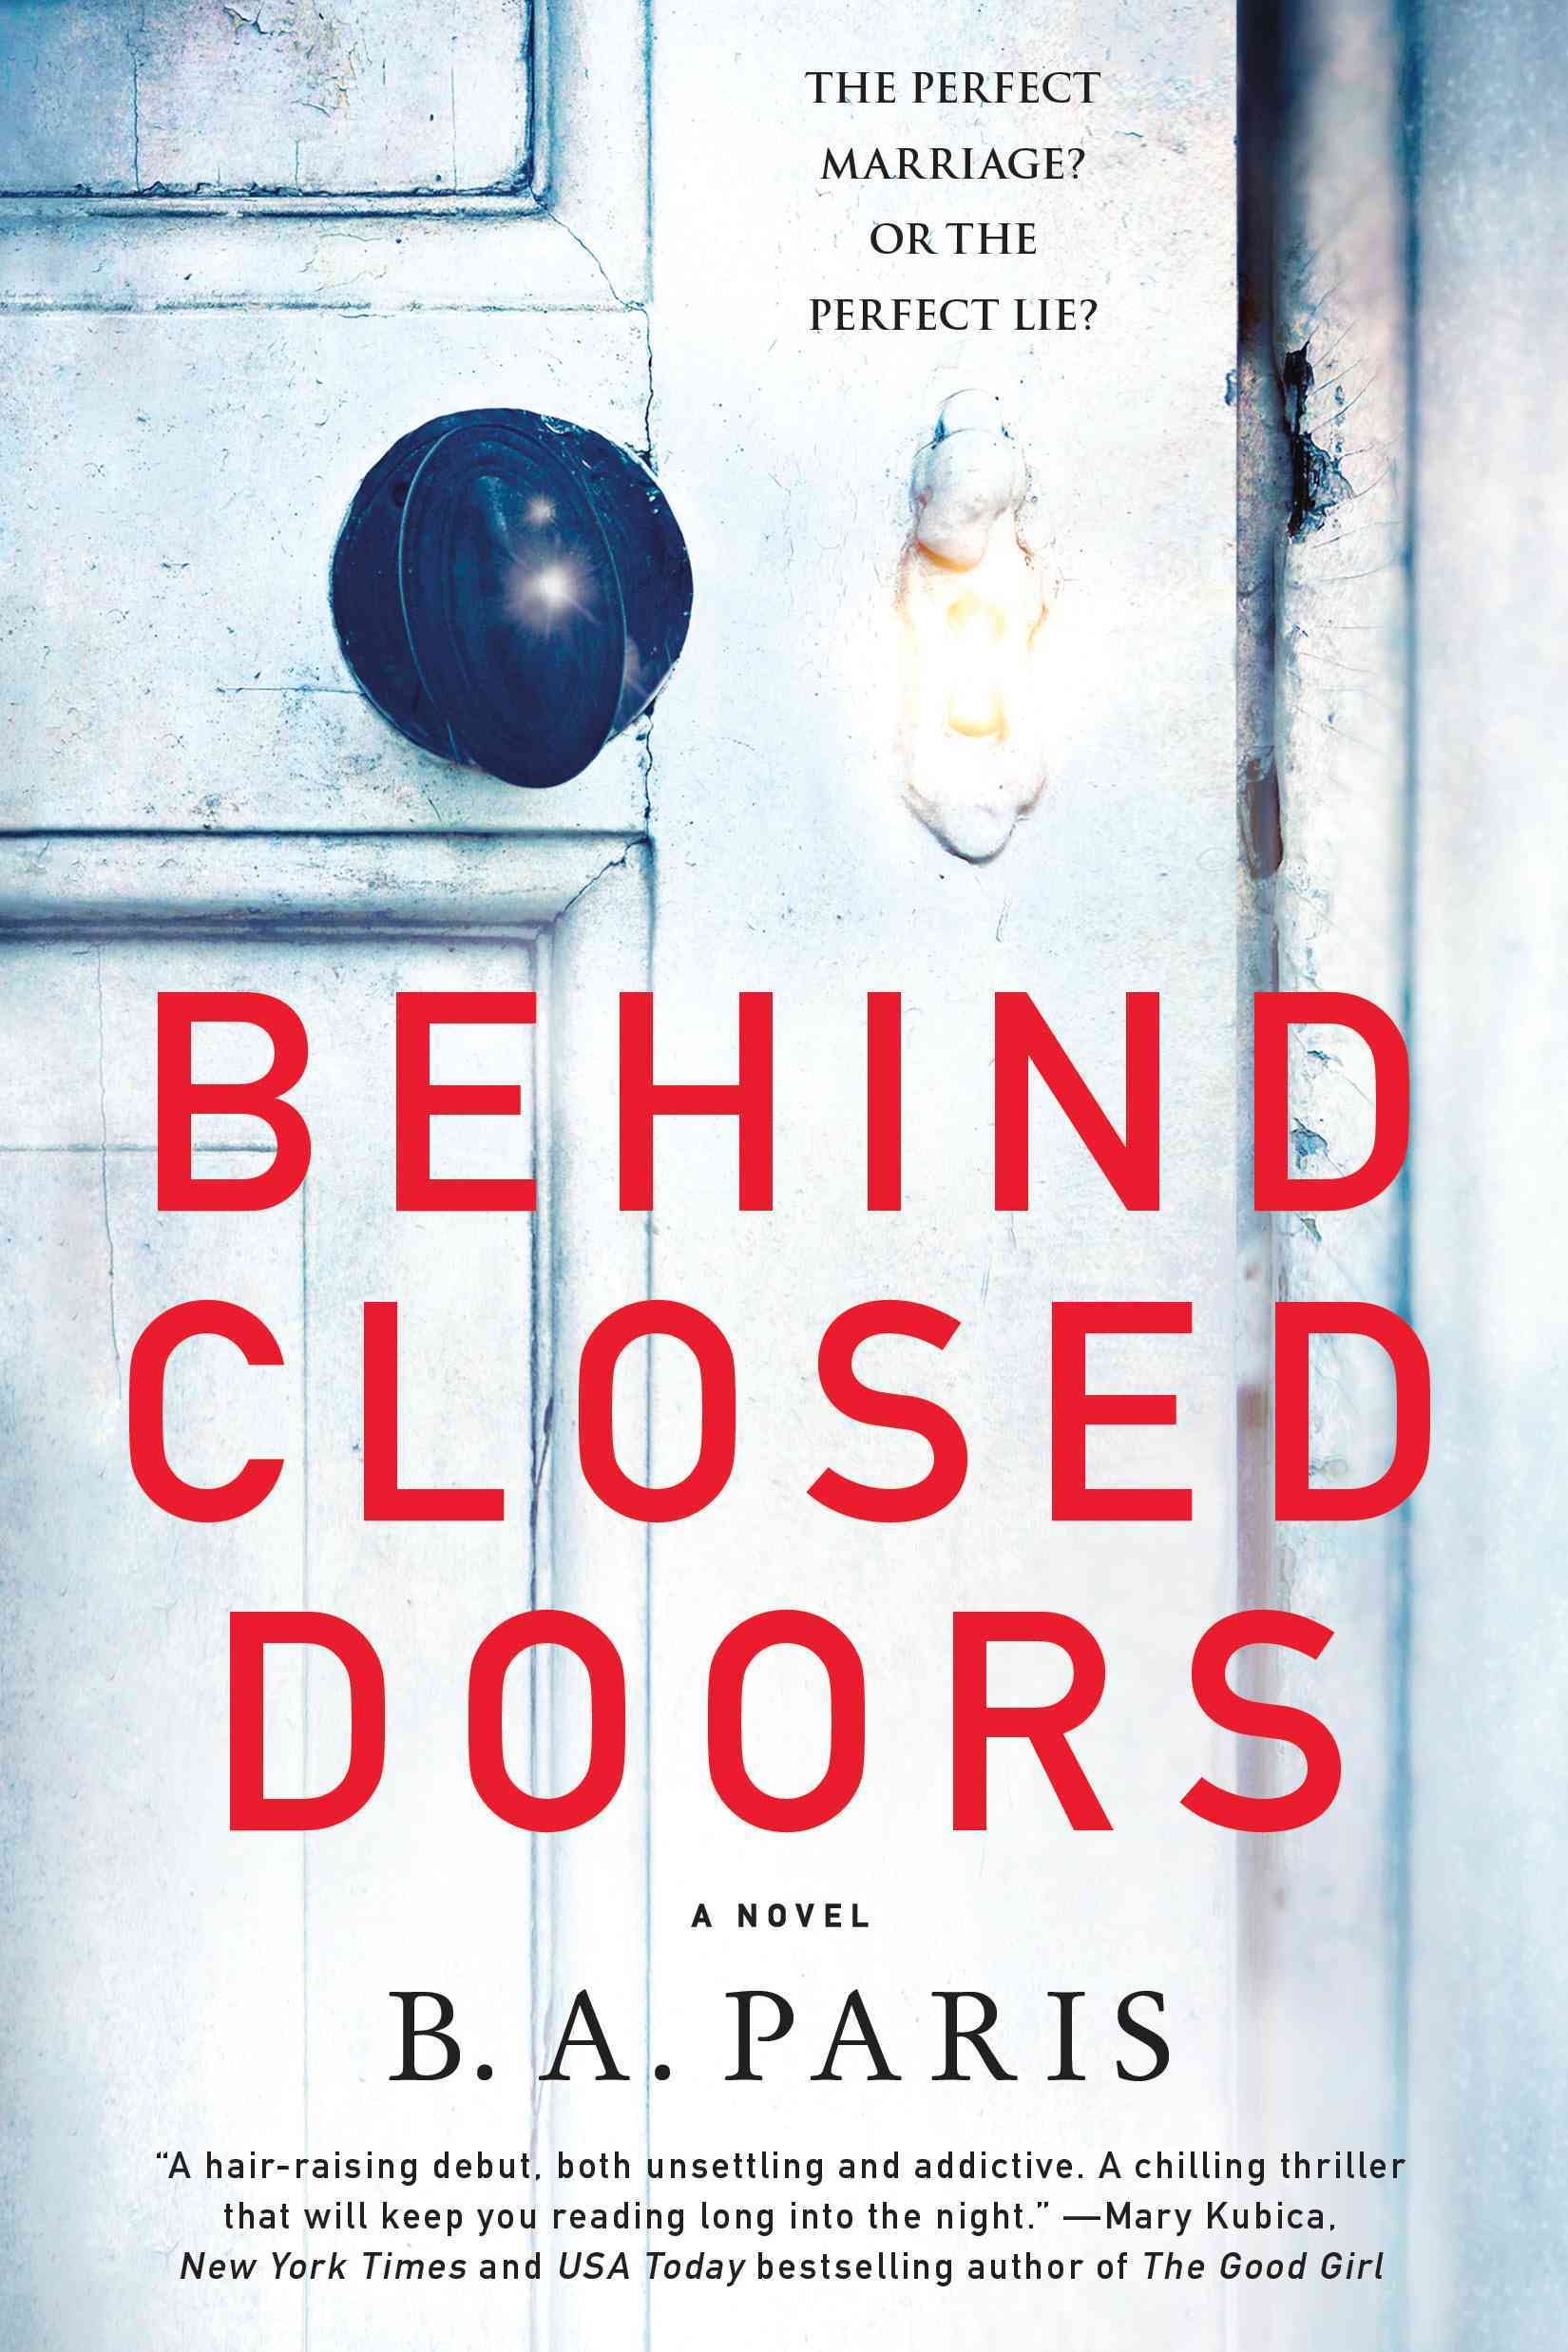 Behind Closed Doors by B.A. Paris book review